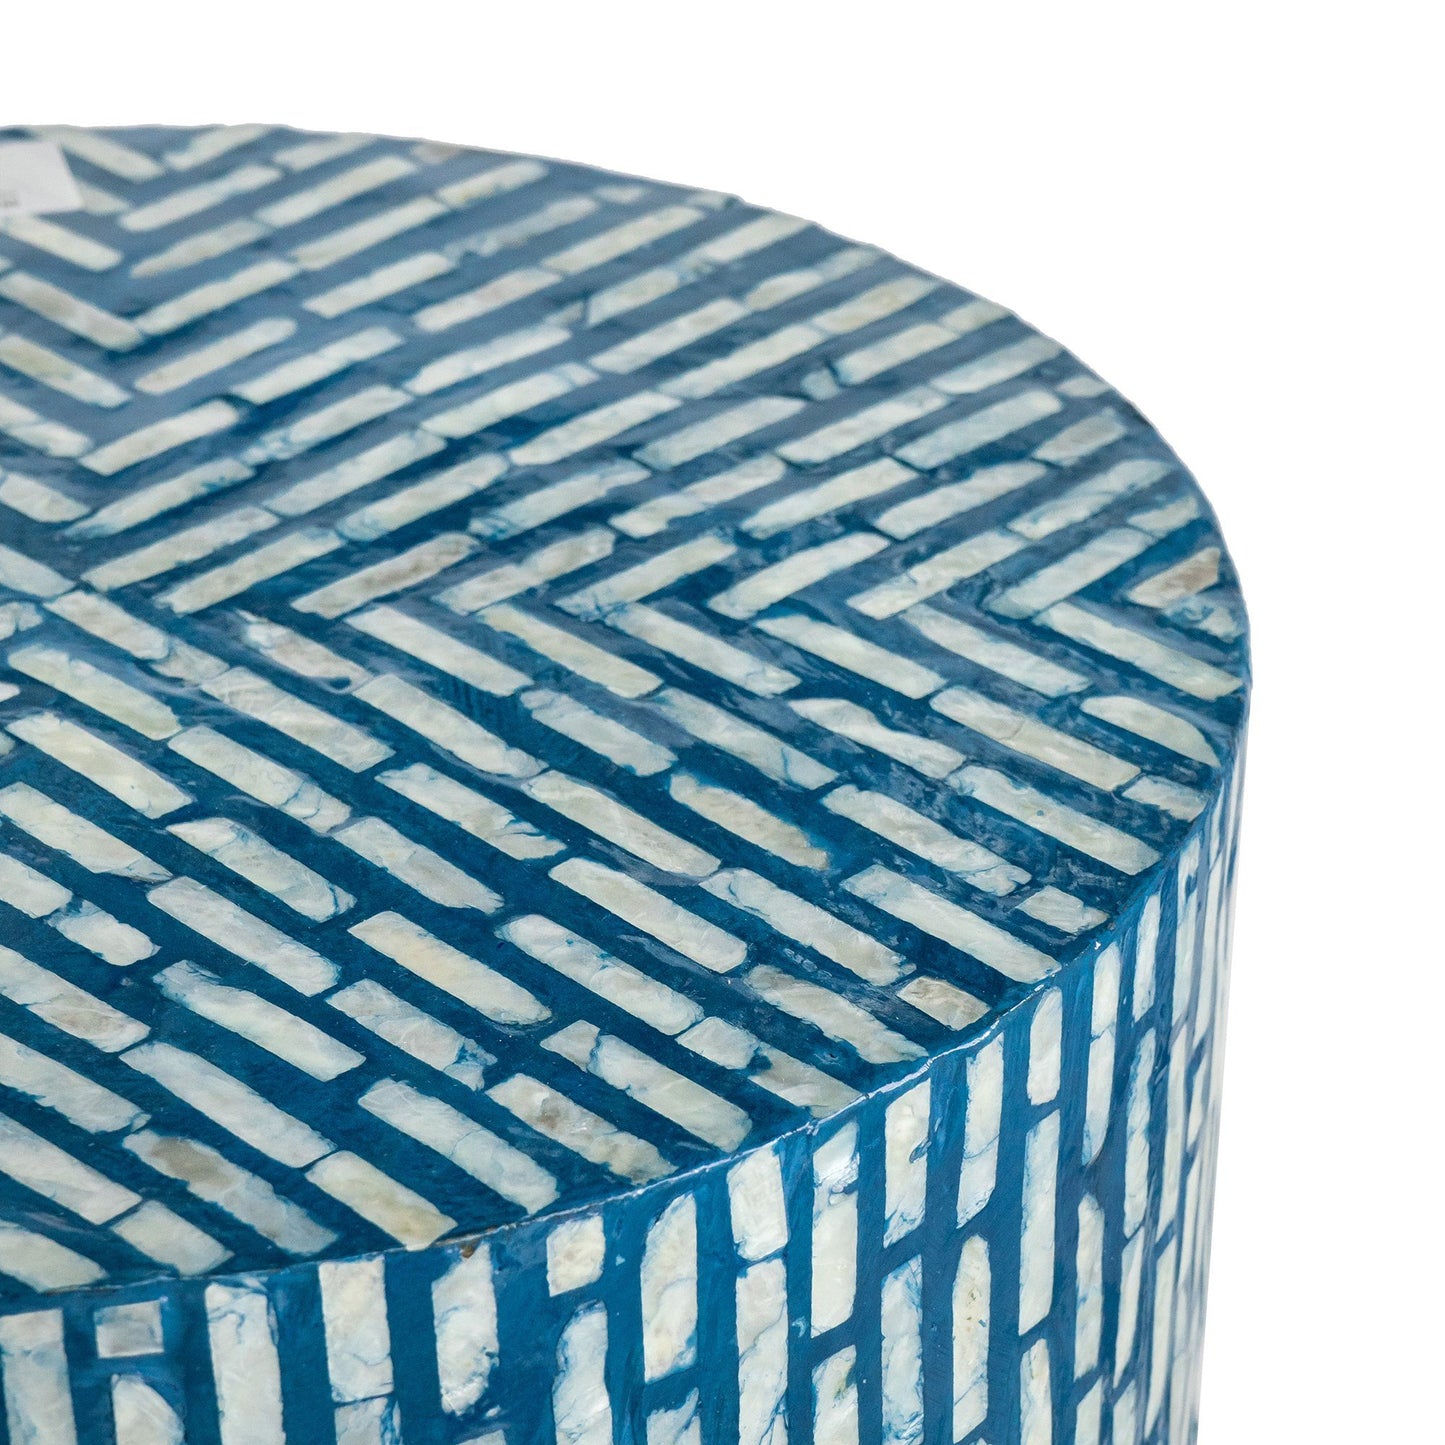 Geelong Shell Stool / Side Table